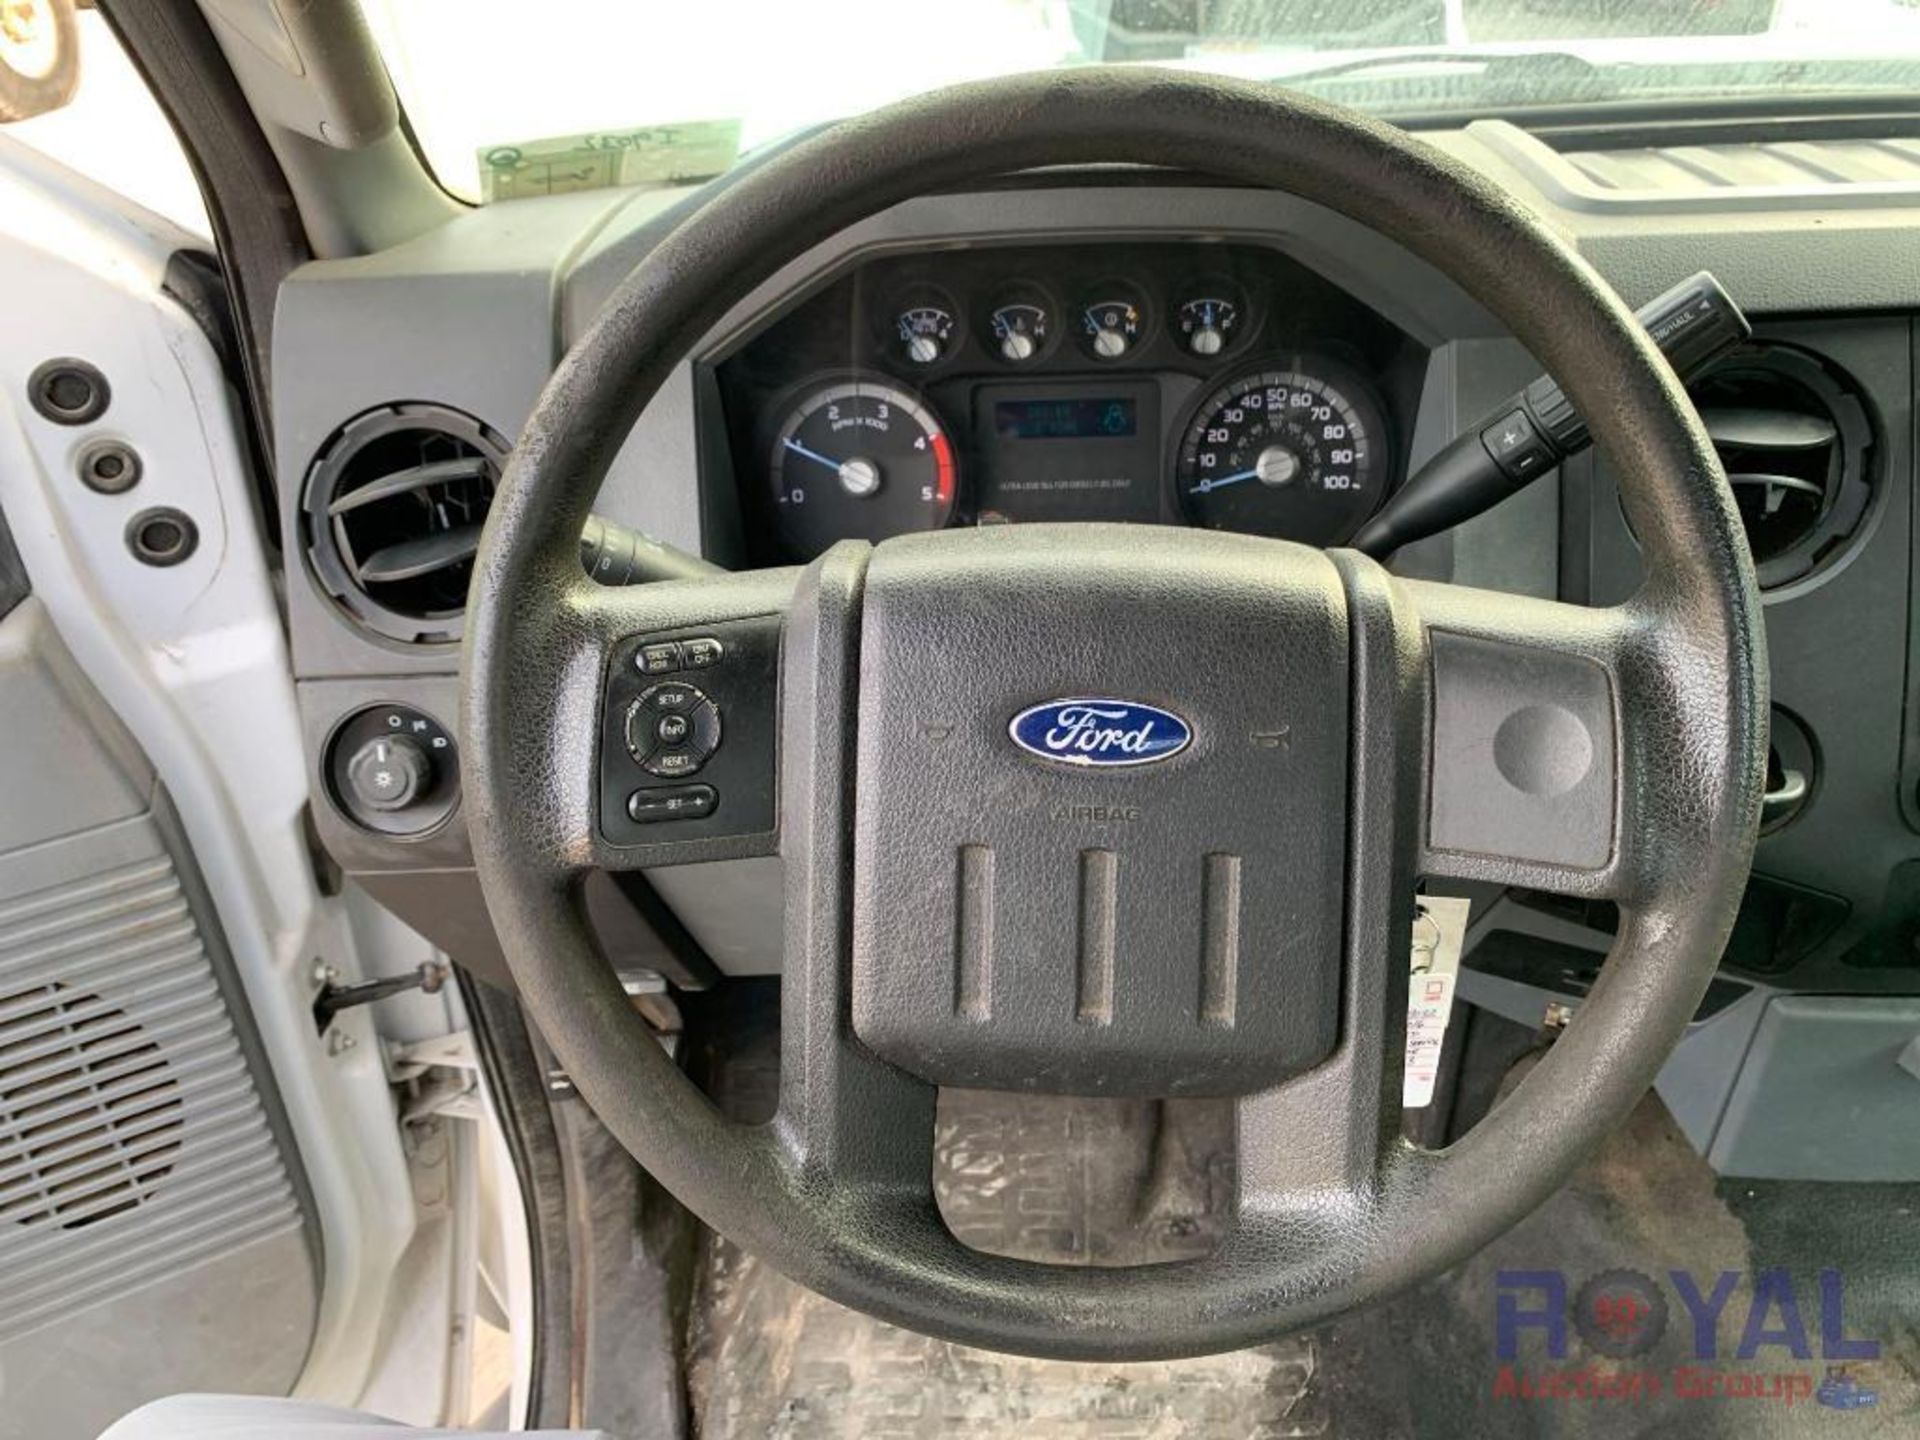 2016 Ford F550 Diesel Service Truck - Image 16 of 30